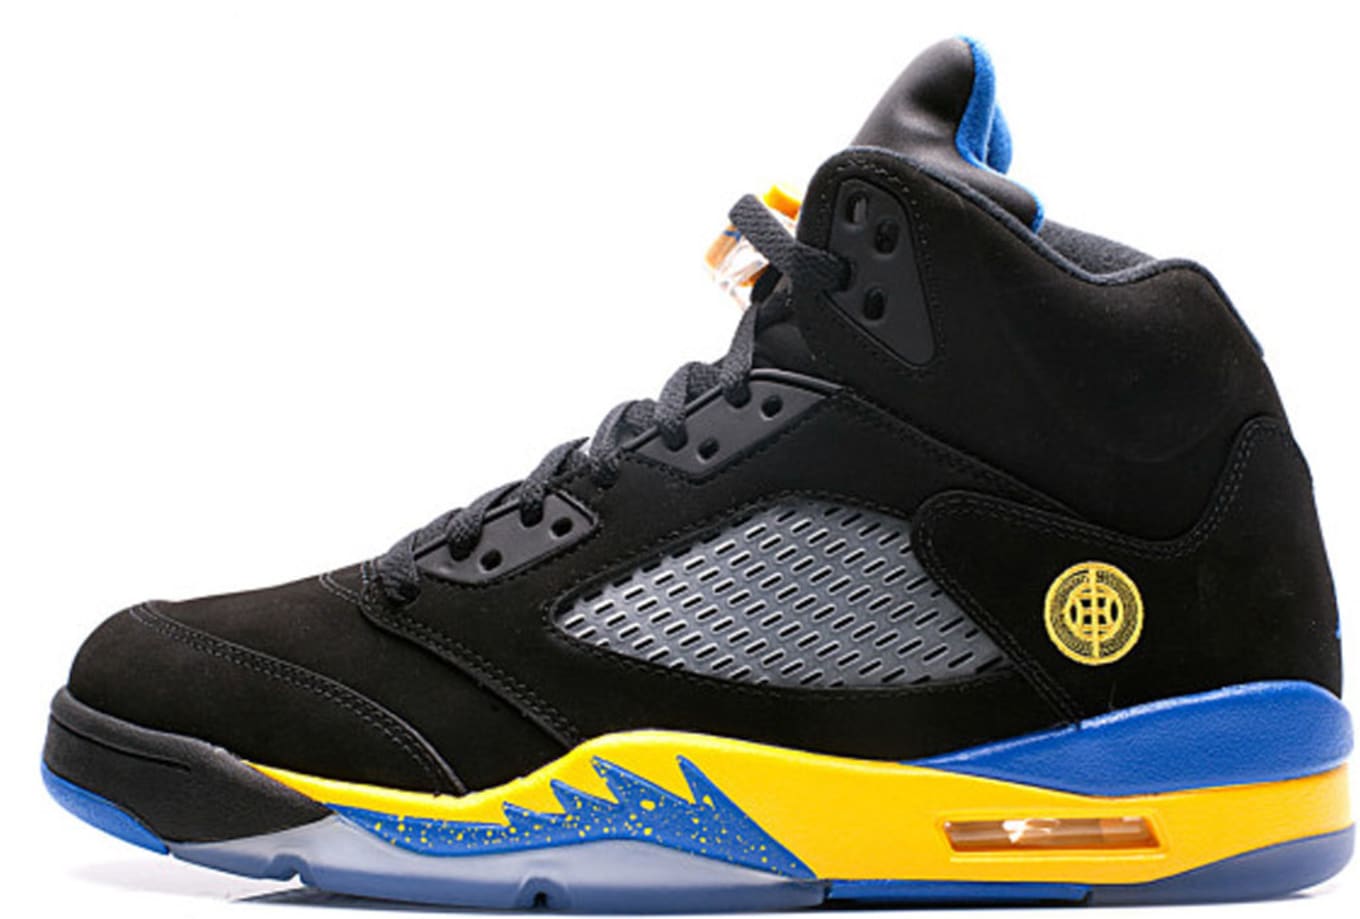 Air Jordan 5: The Definitive Guide to Colorways | Sole Collector